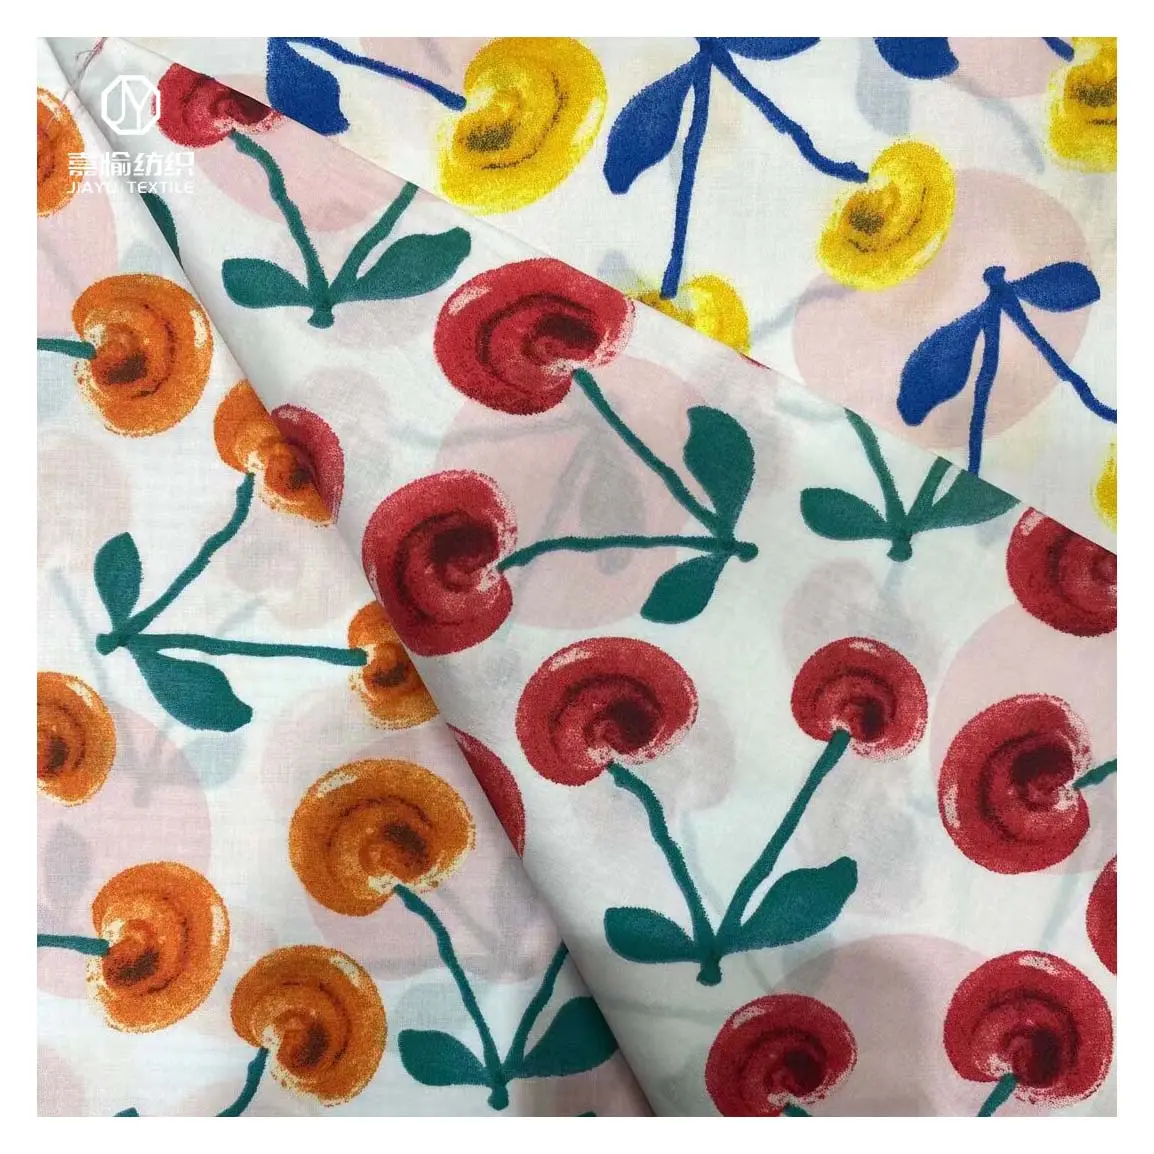 Cheap colorful kids clothing material hot sale soft touch cherry fruit pattern printed fabric 100% organic cotton lawn fabric